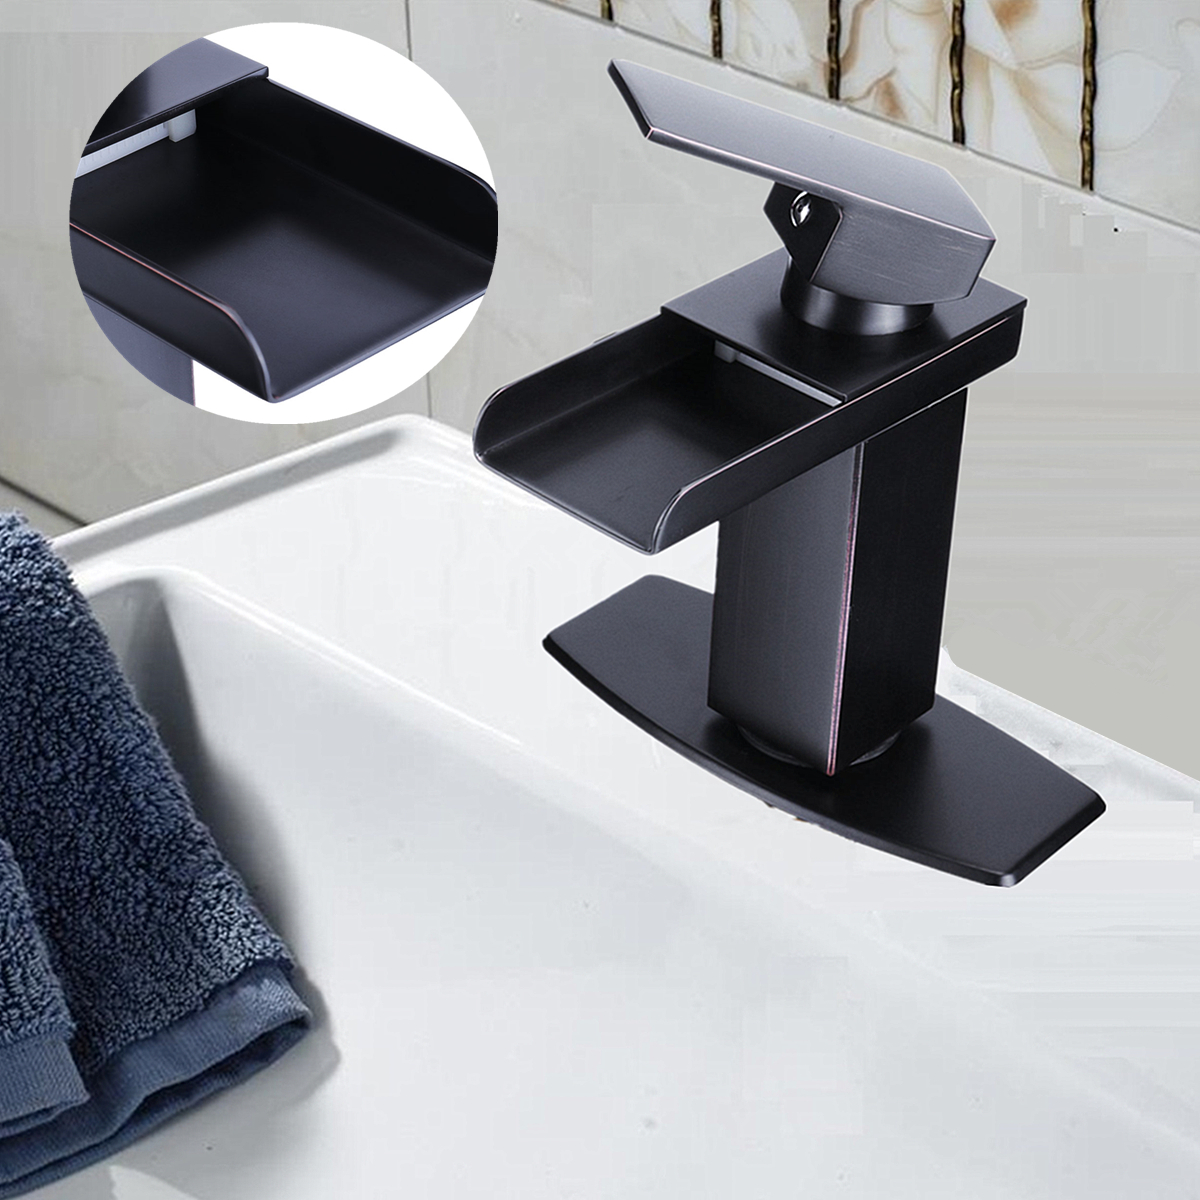 

Oil Rubbed Square Faucet Bathroom Single Tap Basin Waterfall Spout Sink Mixer